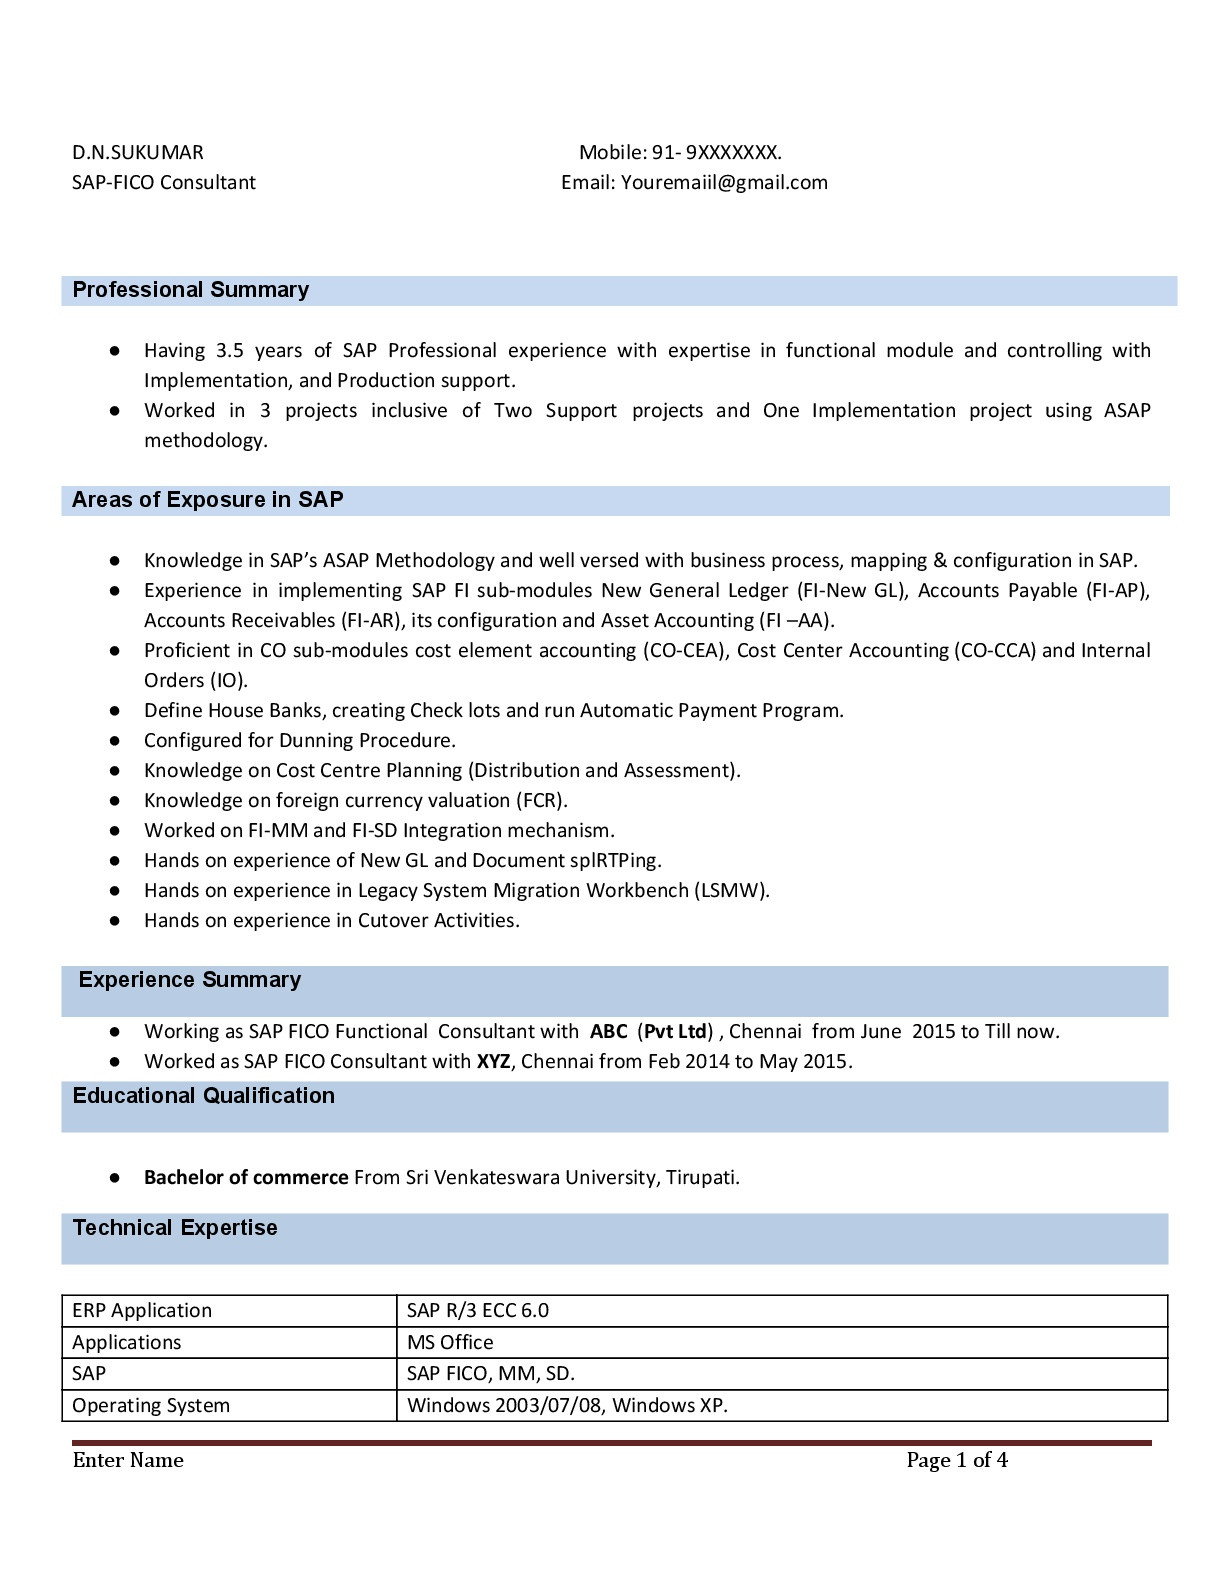 Sample Resume for Sap Fico Consultant Fresher Sap Fico Resume with 3 Years Experience – Instant Download …